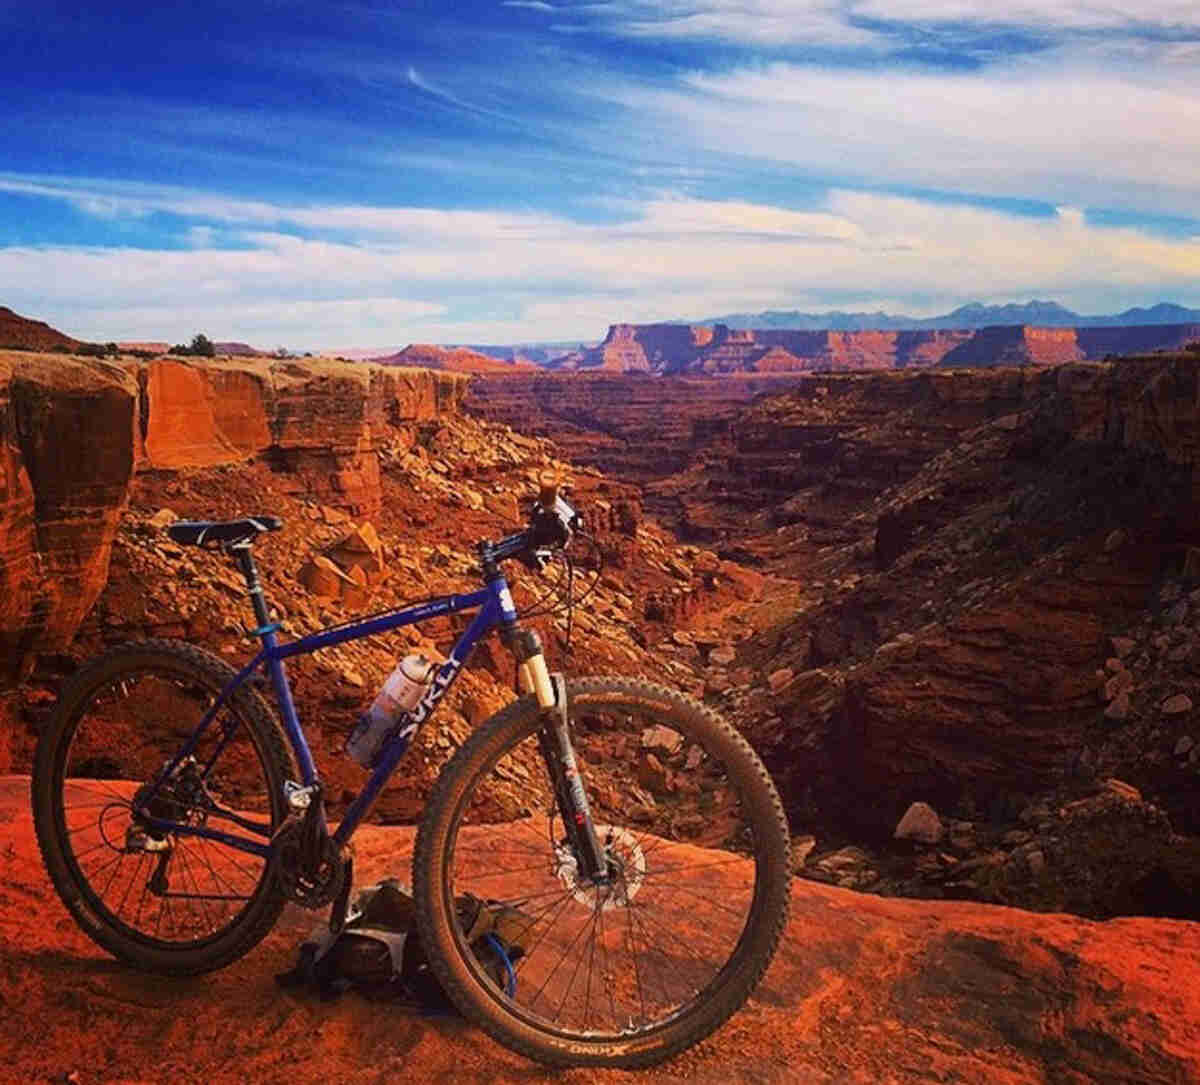 Right side view of a blue Surly Karate Monkey bike, parked on the edge of a red canyon, with buttes in the background